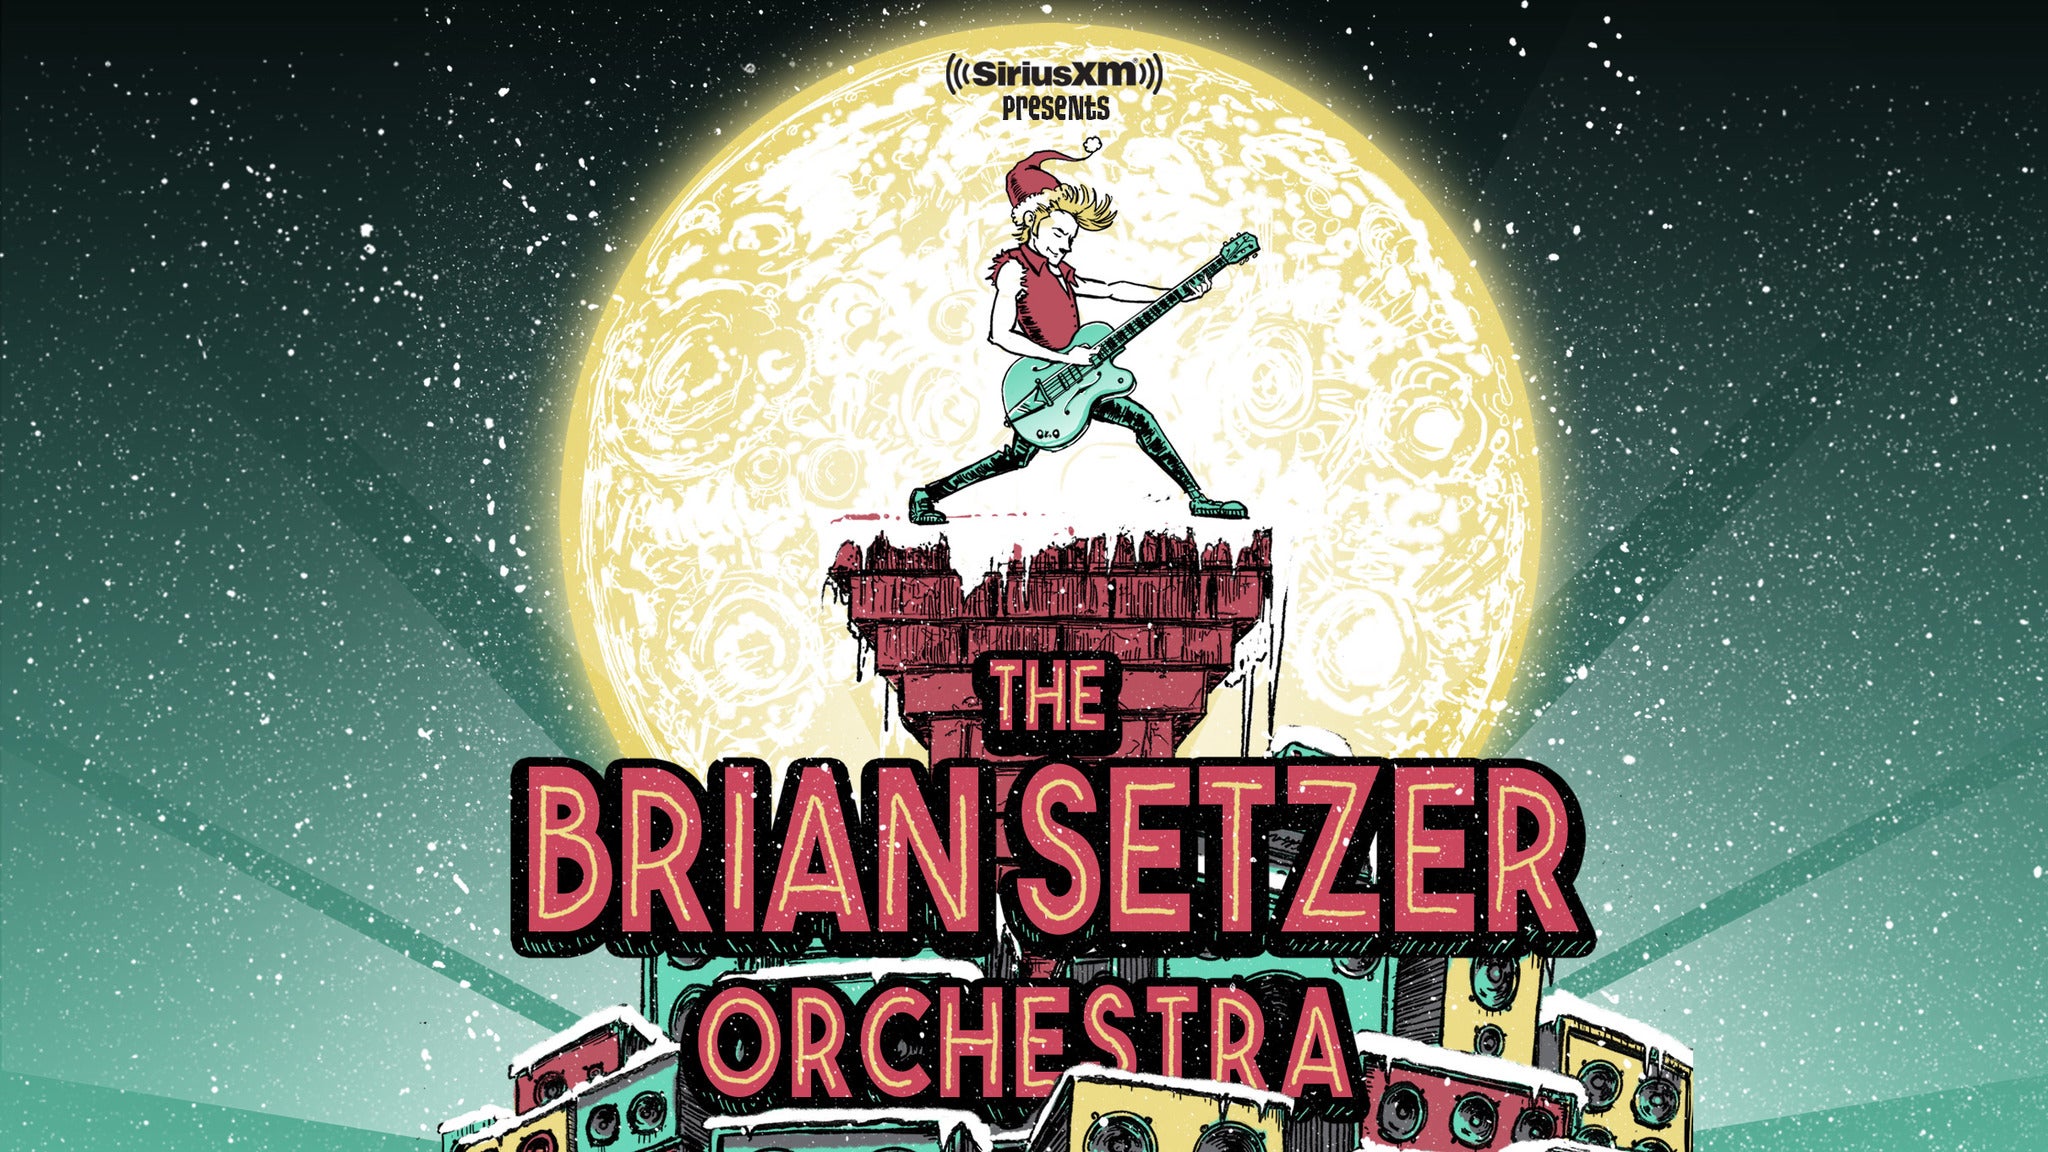 The Brian Setzer Orchestra's 16th Annual Christmas Rocks! Tour in Denver promo photo for Fan Club presale offer code